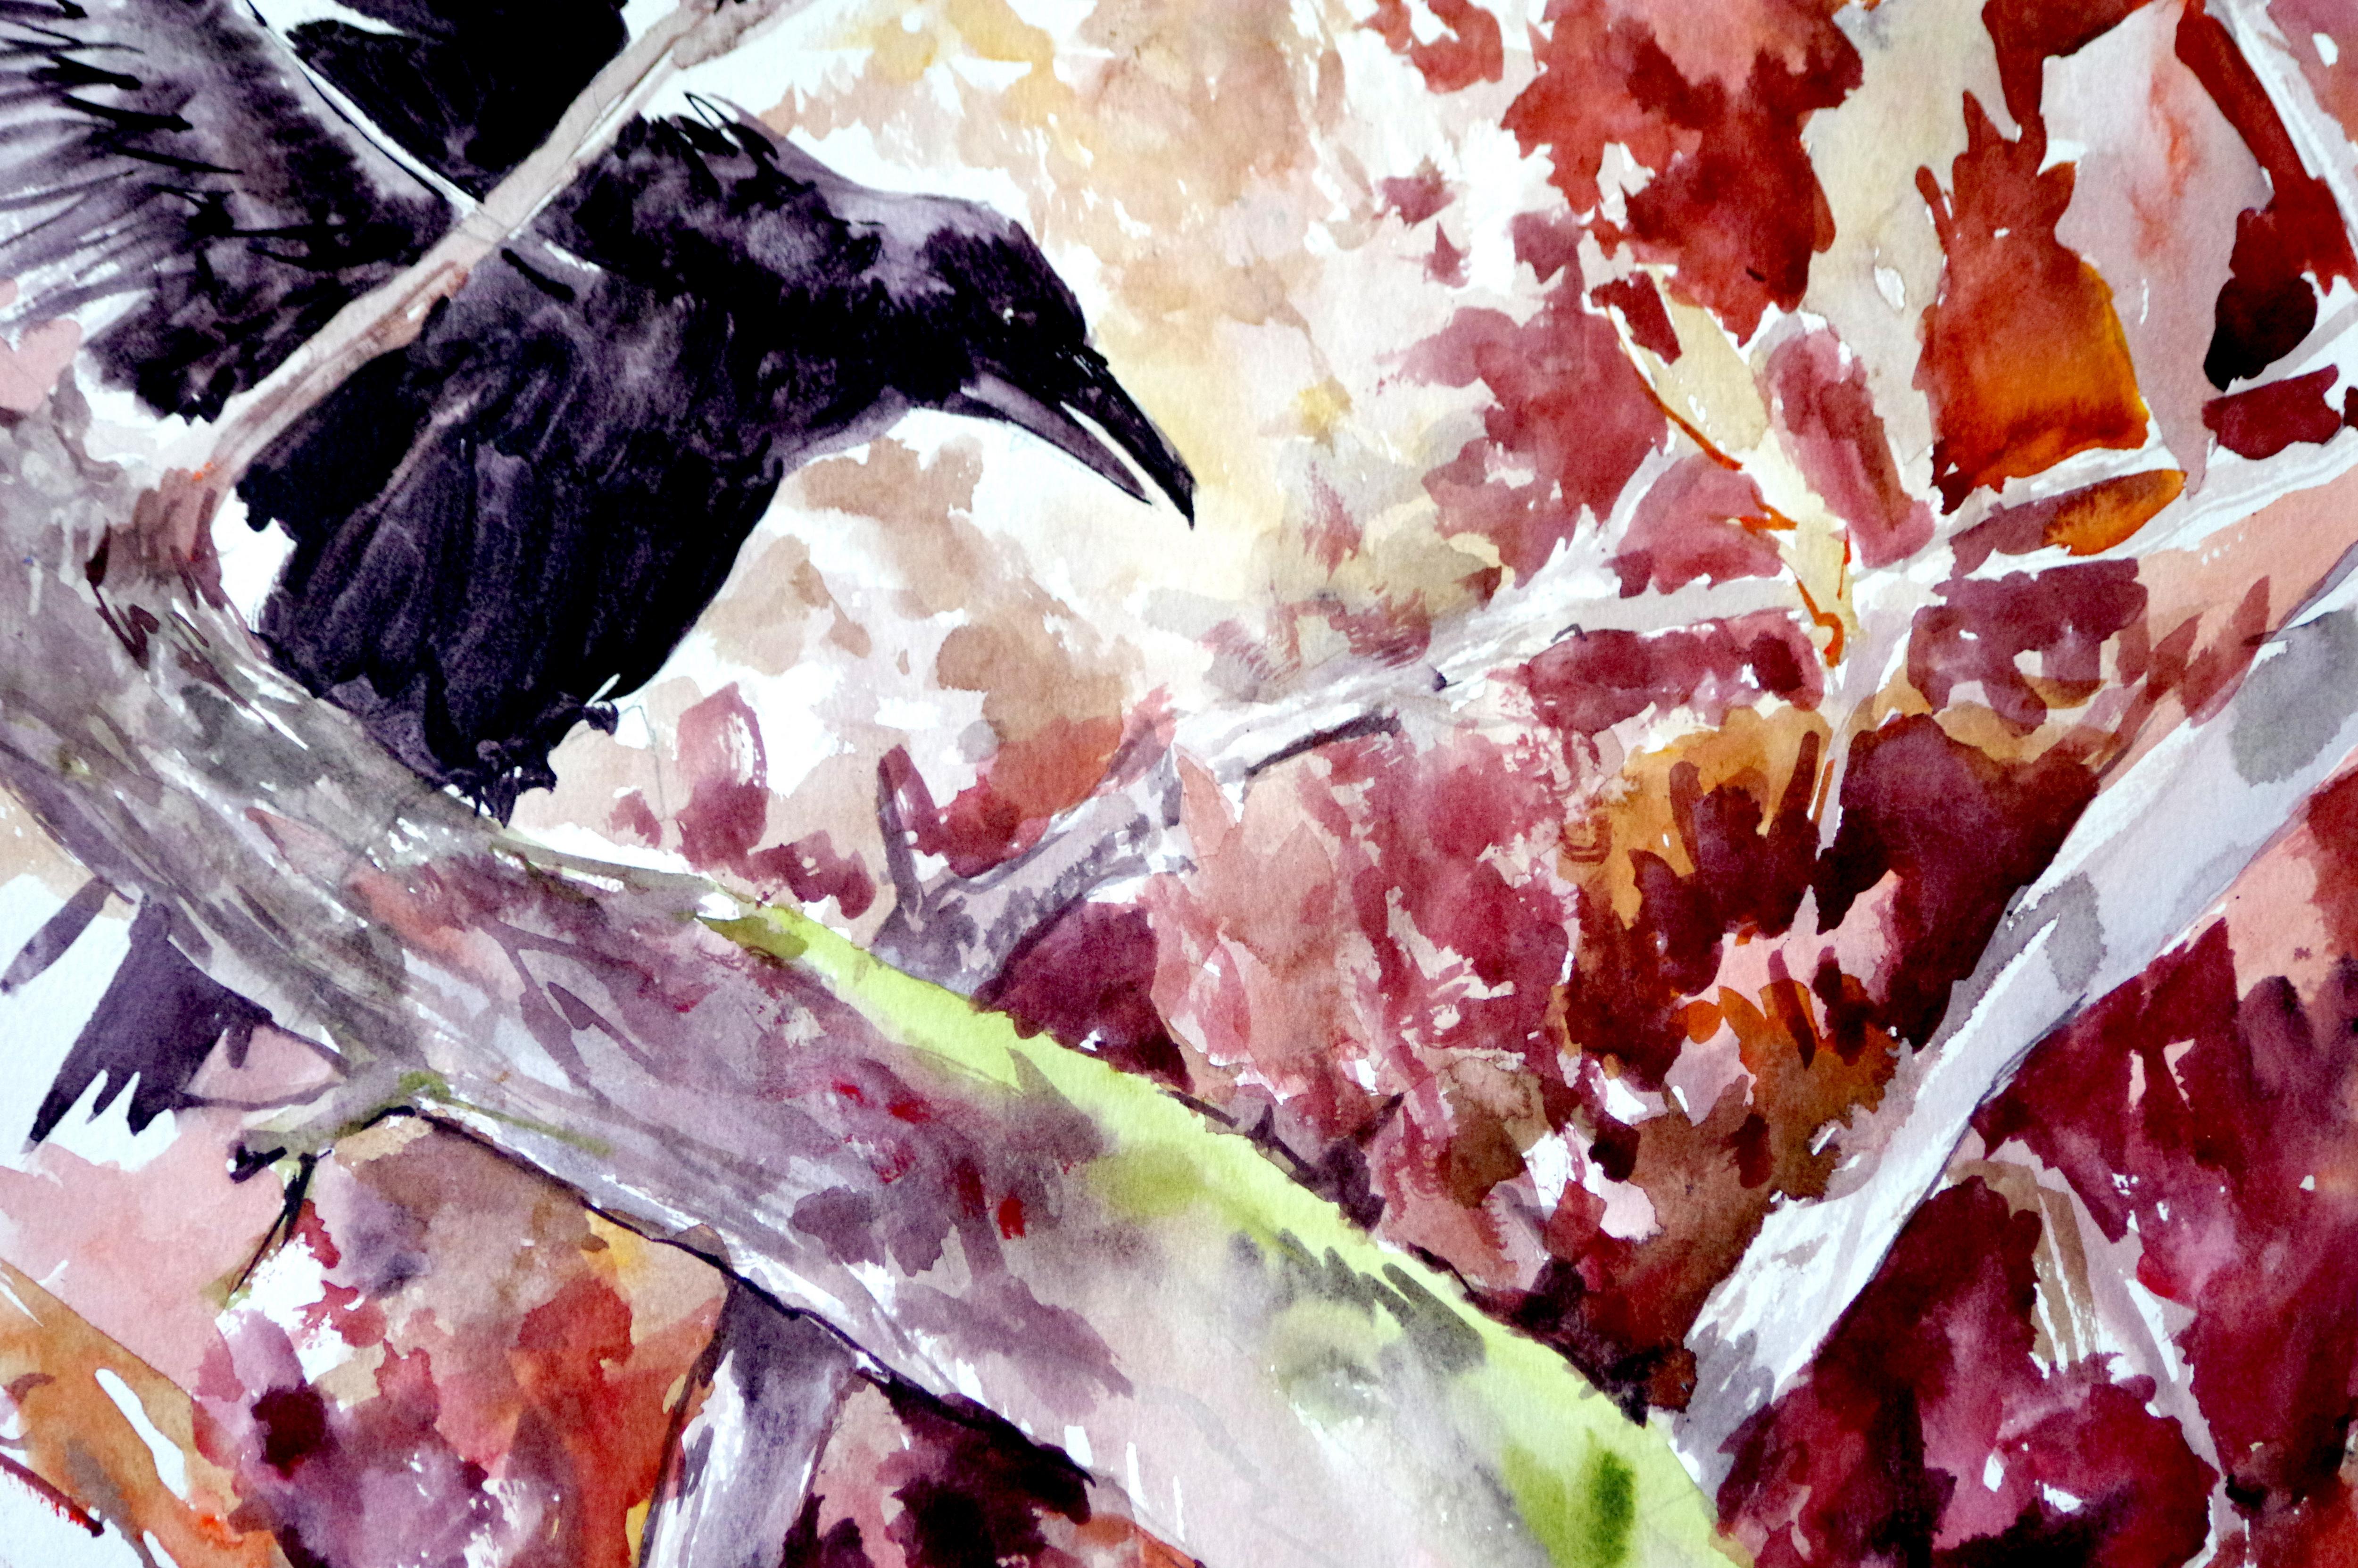 Flying Raven and the Fall, Original Painting - Contemporary Art by Suren Nersisyan